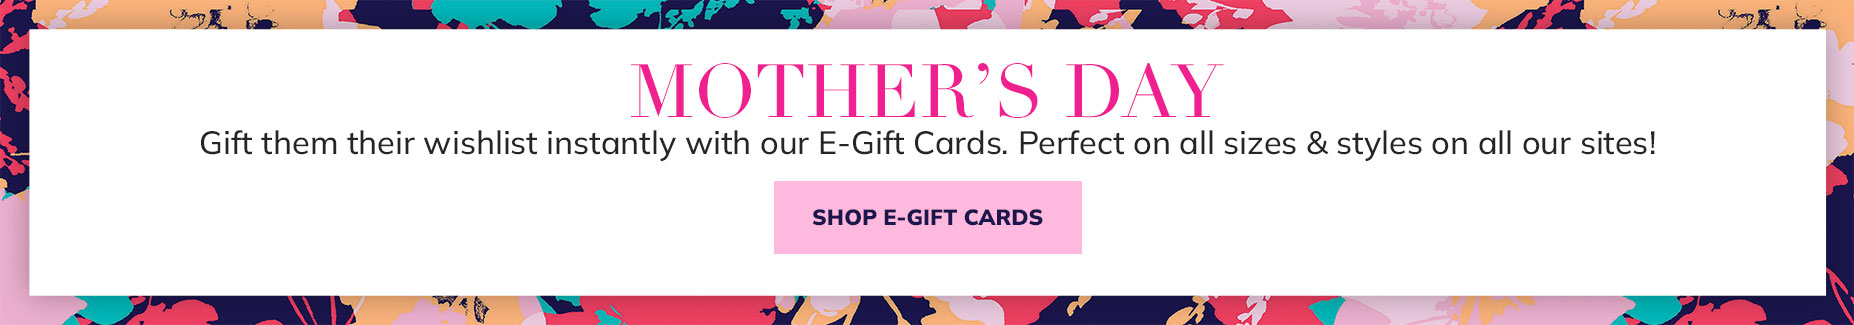 Shop e-gift cards for Mother's Day